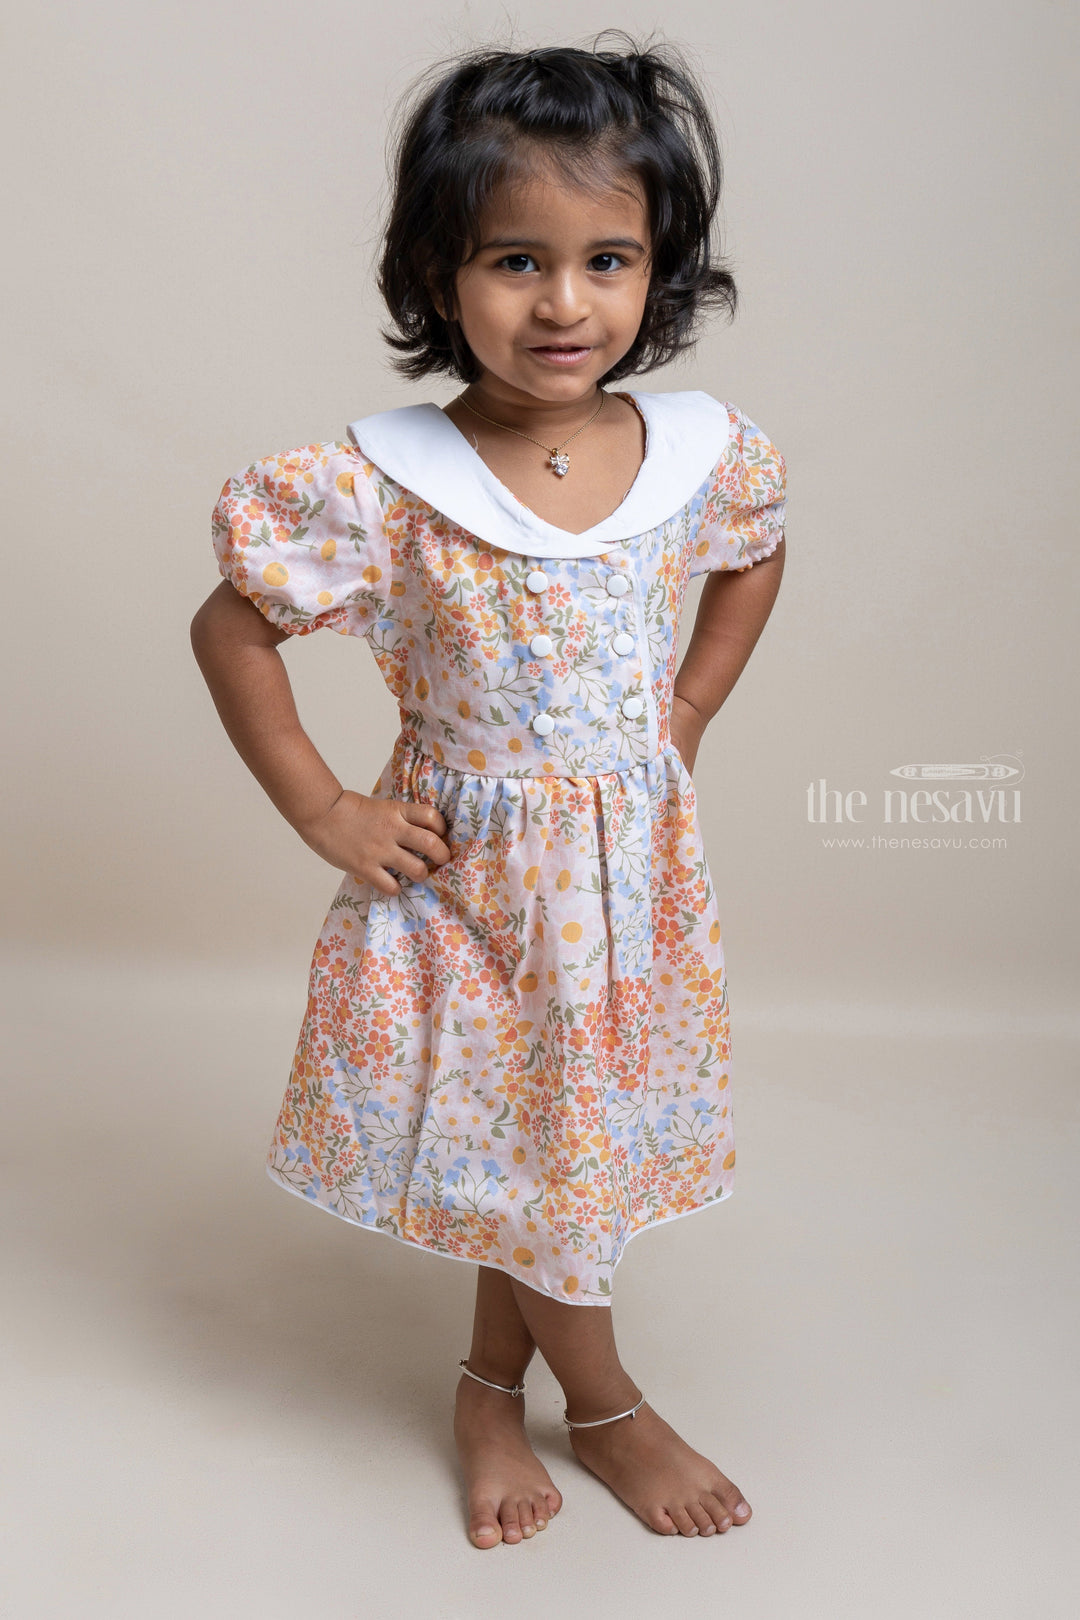 The Nesavu Girls Fancy Frock Fantastic Yellow Floral Allover Printed Cotton Frock For Girls Nesavu 18 (2Y) / Orange / Rayon GFC1017A Trendy Floral Printed Frocks Online | New Arrivals | The Nesavu